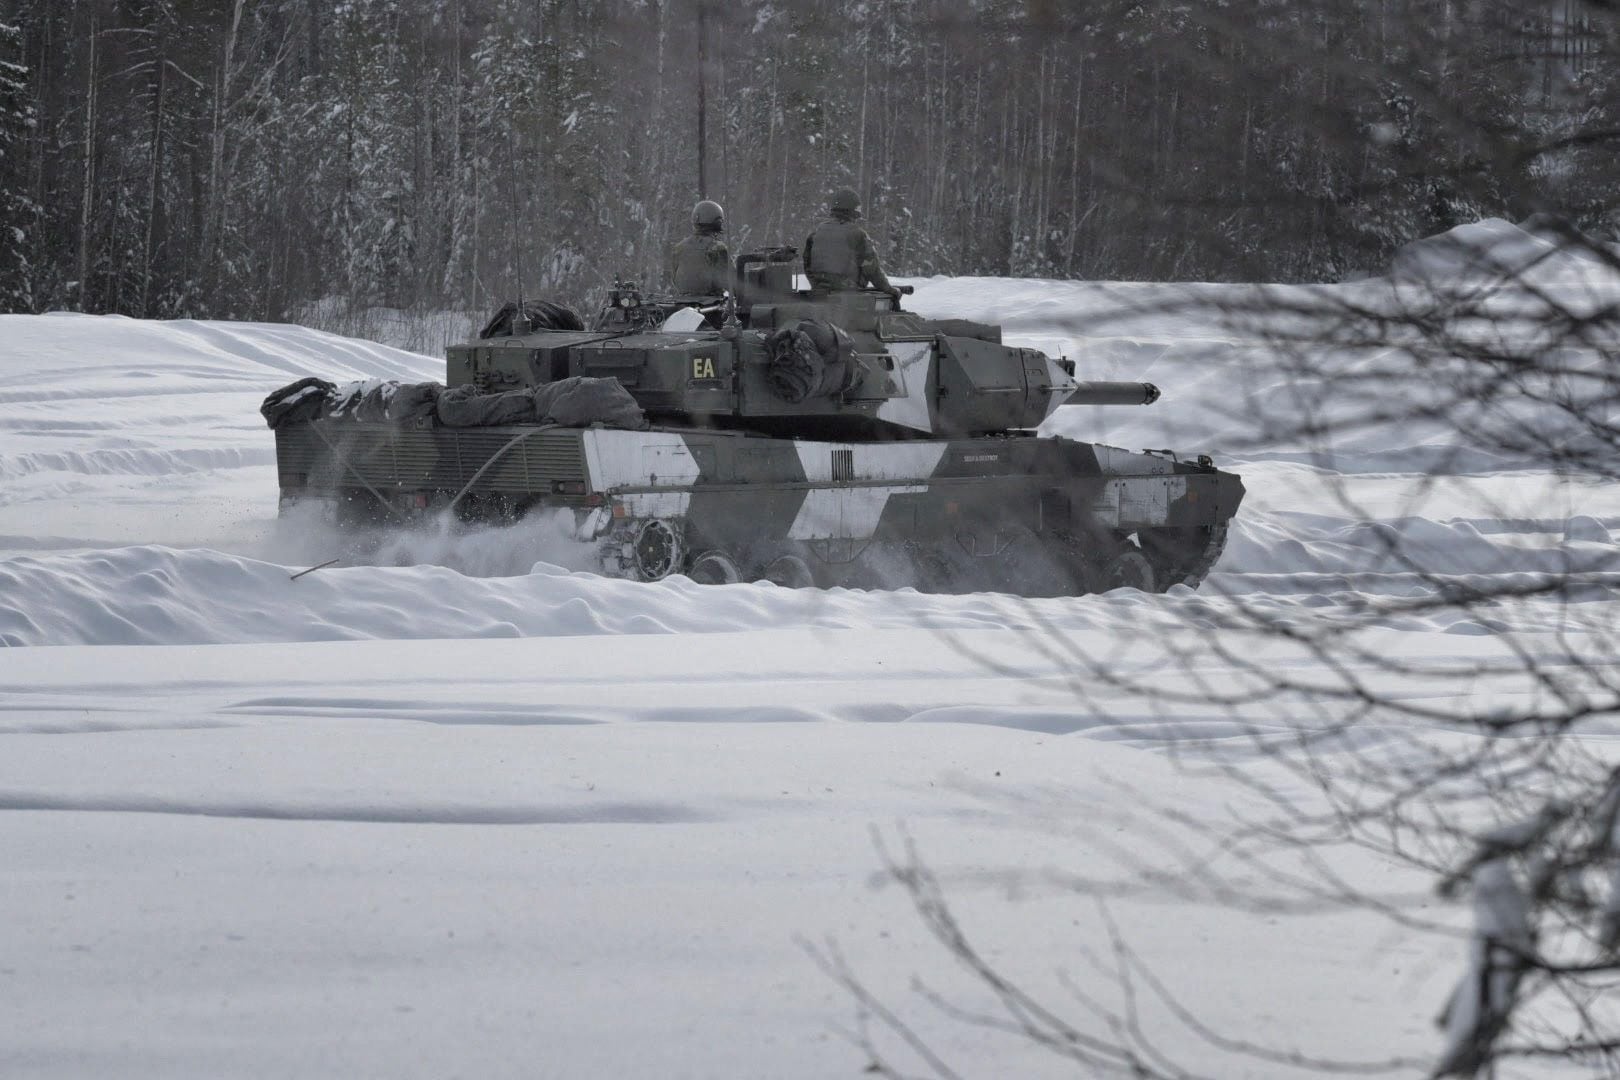 A view shows a Leopard 2 tank from the I19 Armored Battalion before Prime Minister Ulf Kristersson and Defence Minister Pal Jonson hold a press conference in Boden at the Norrbotten Regiment (I19) in connection with the anniversary of Russia's invasion of Ukraine, in Boden, Sweden February 24, 2023. Andreas Sjolin /TT News Agency/via REUTERS   THIS IMAGE HAS BEEN SUPPLIED BY A THIRD PARTY. SWEDEN OUT. NO COMMERCIAL OR EDITORIAL SALES IN SWEDEN